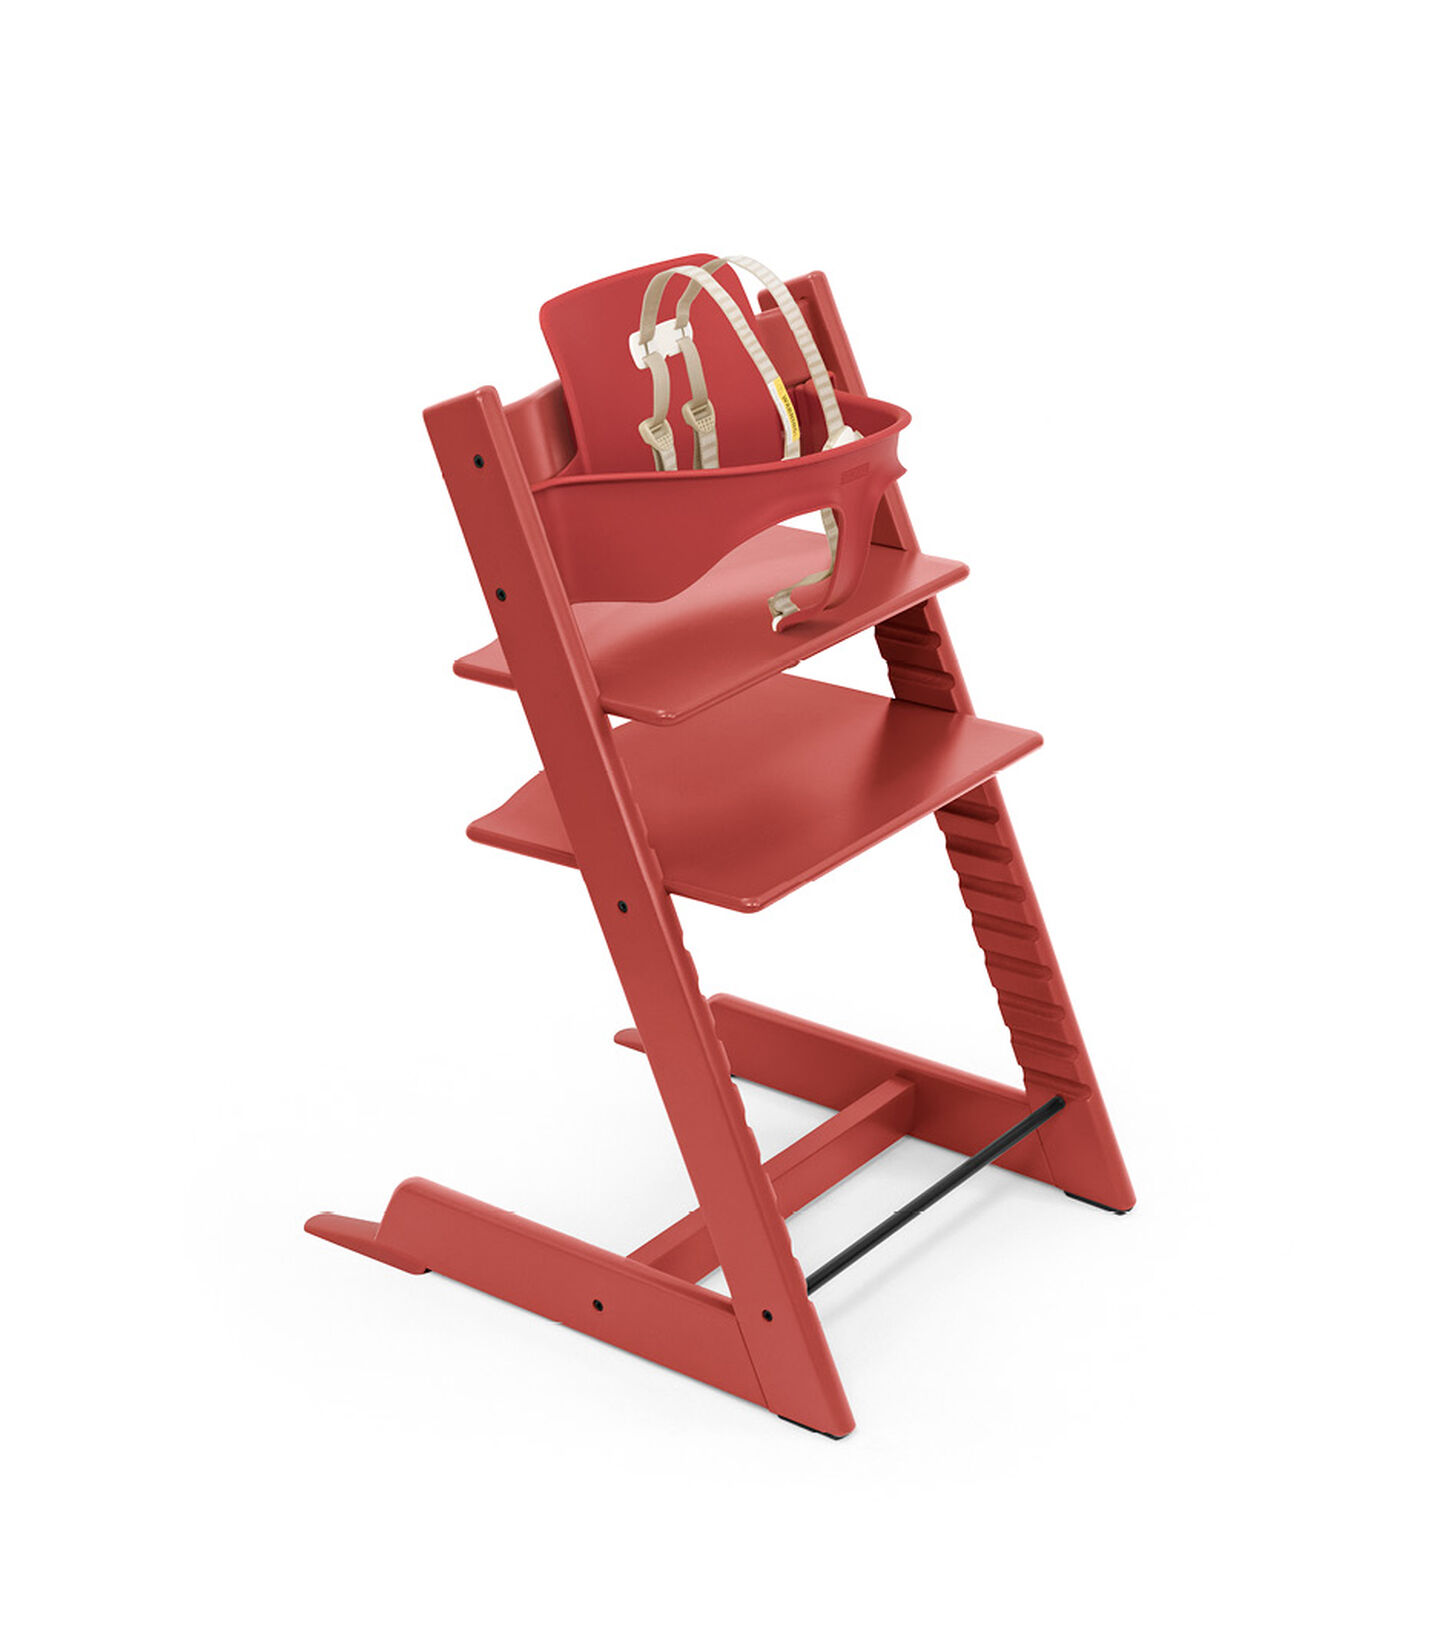 Tripp Trapp® Bundle High Chair US 20 Warm Red, Warm Red, mainview view 1